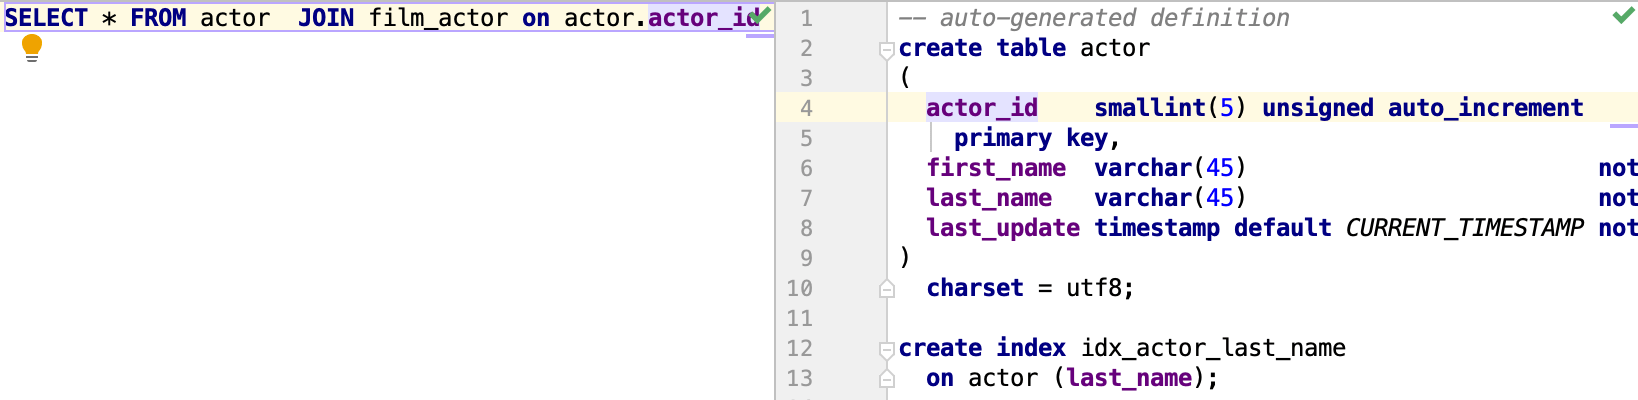 Open a definition in the DDL editor